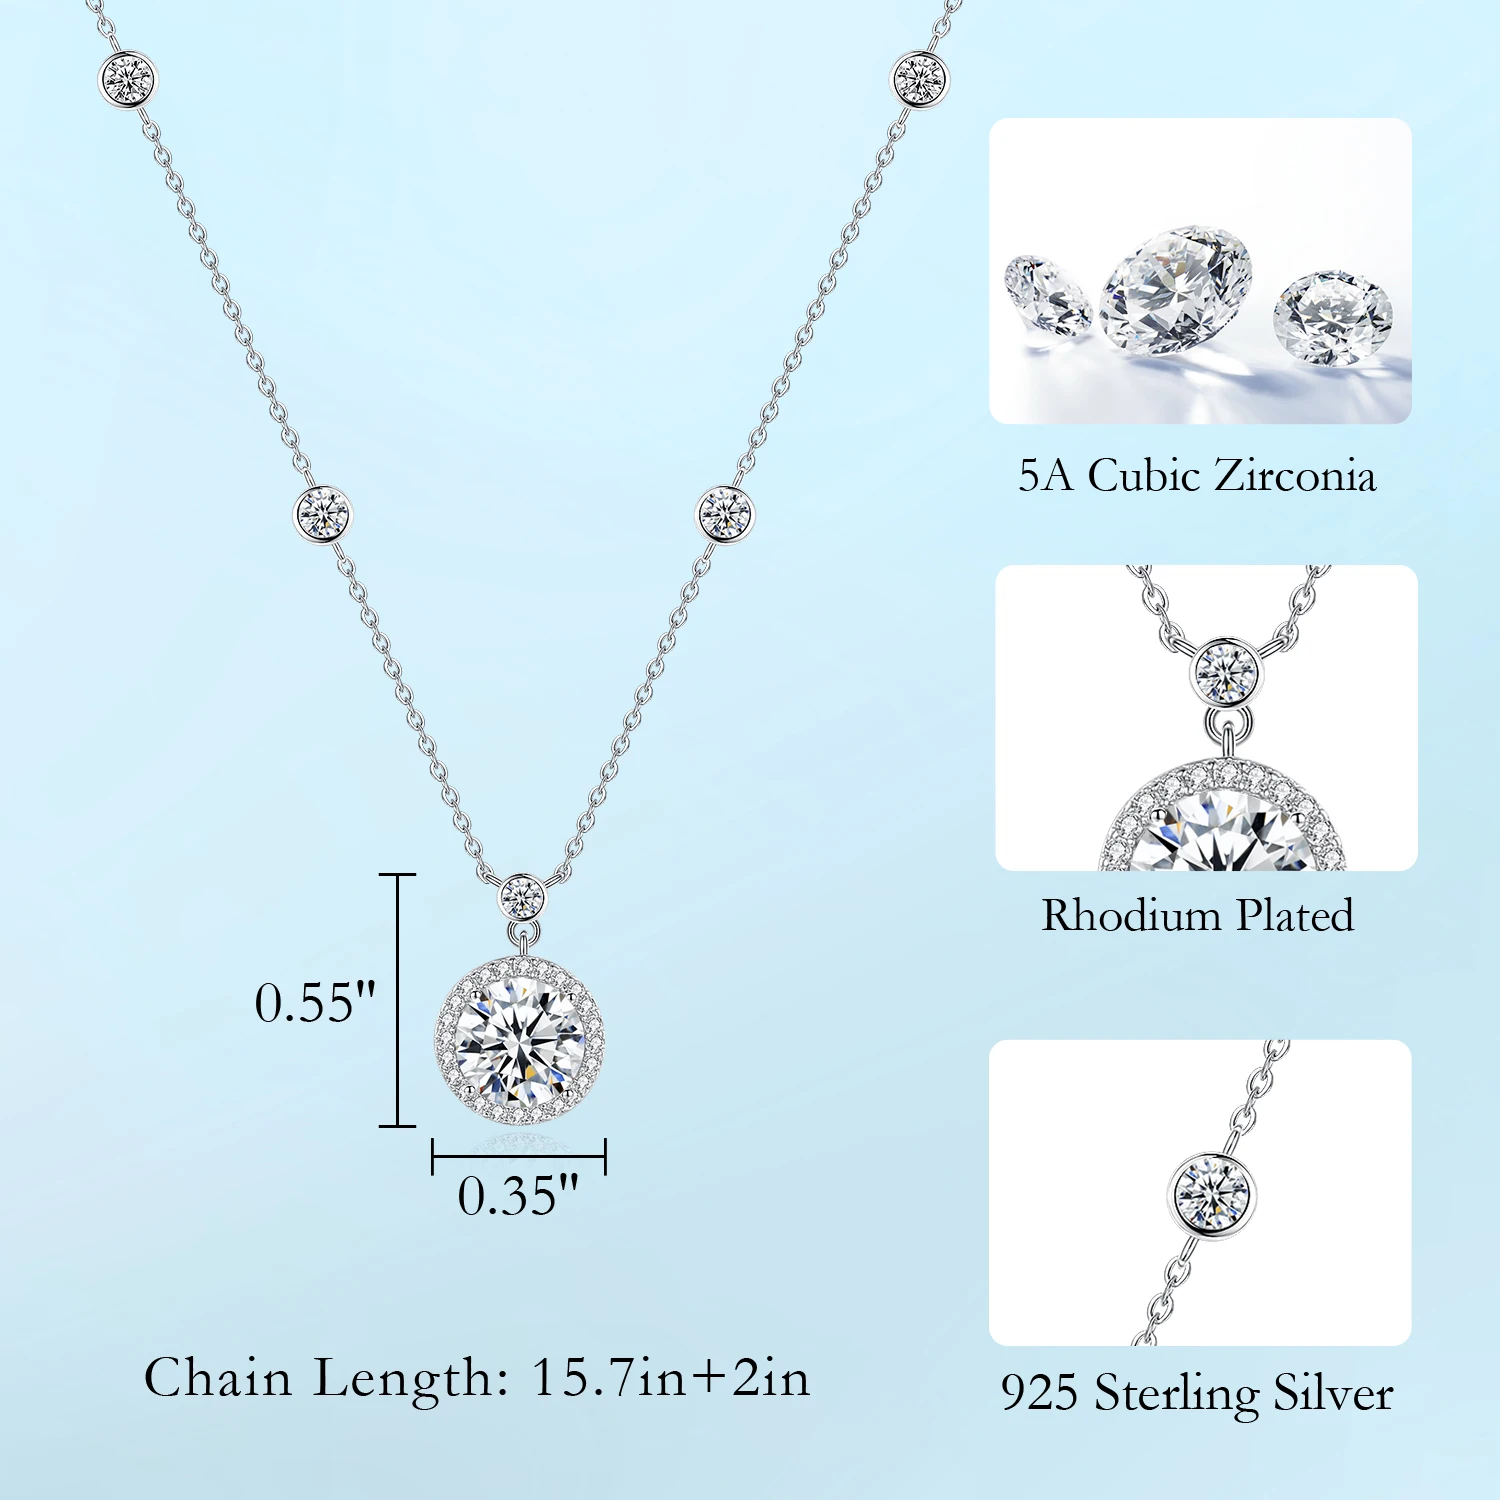 CDE WYN4 Fine 925S Silver Jewelry Necklace Wholesale Round 5A Cubic Zirconia Pendant Rhodium Plated Chain Women Pendant Necklace